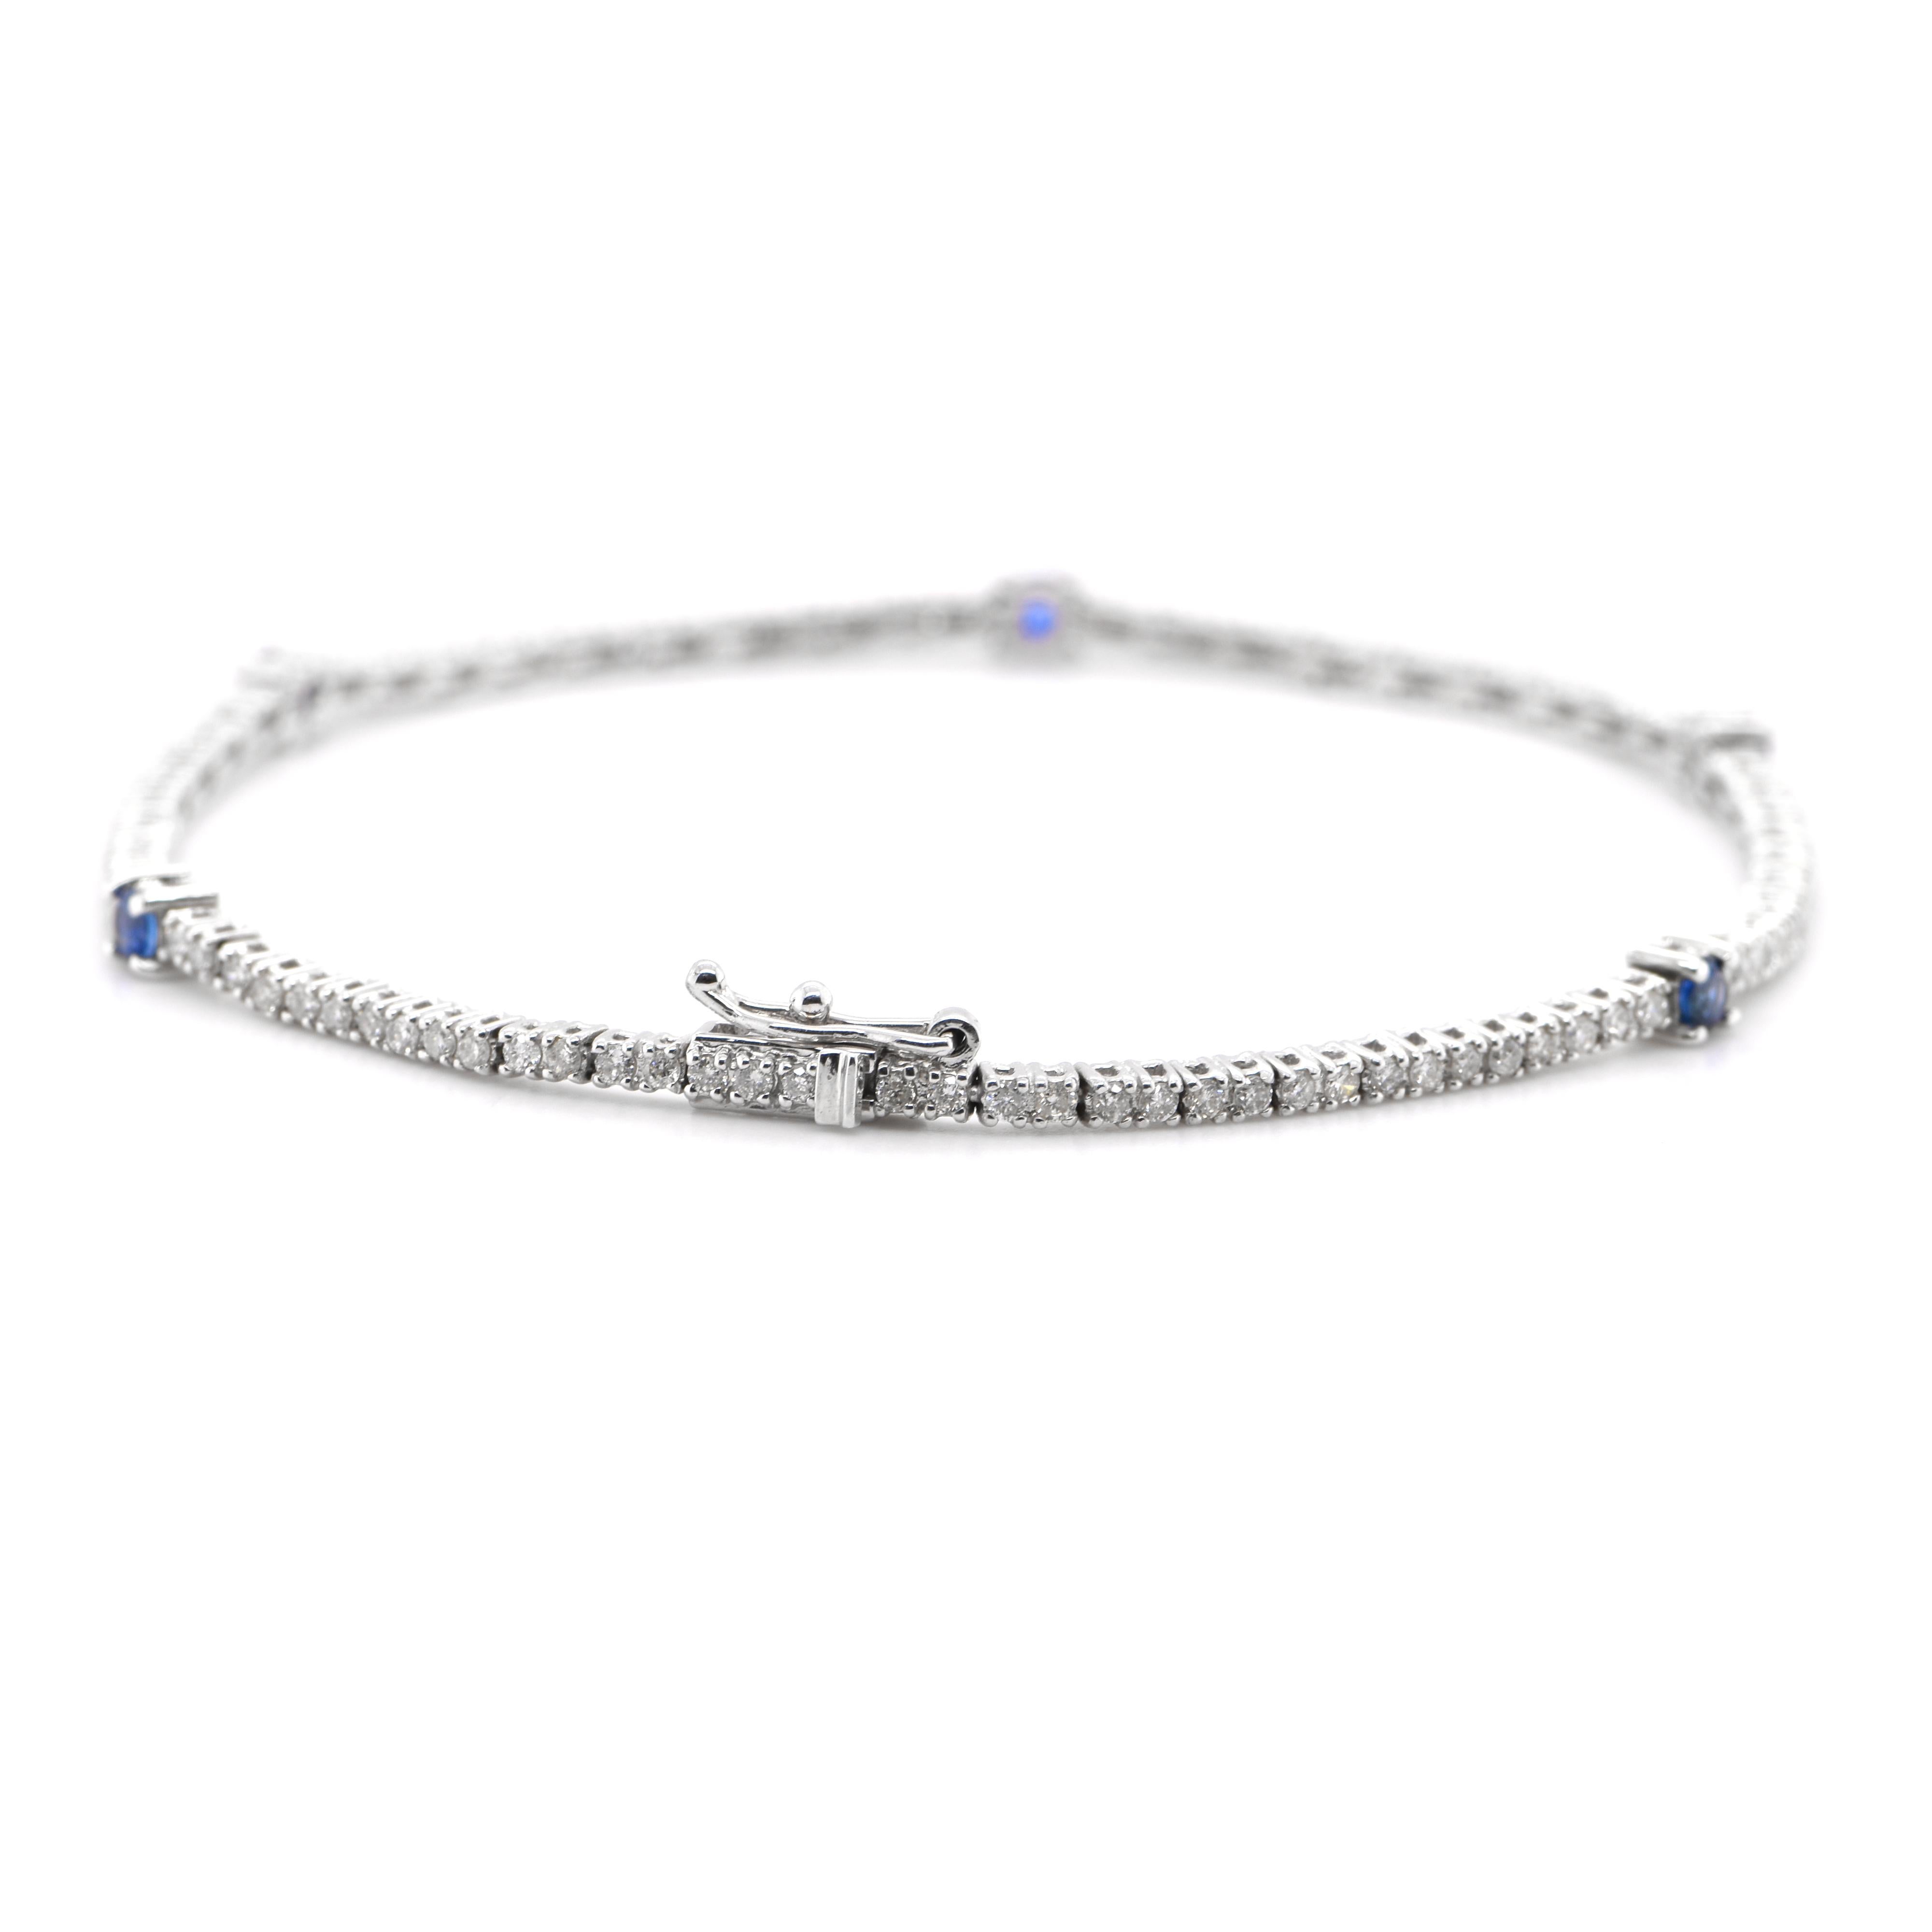 Women's 0.40 Carats Natural Sapphires and Diamonds Tennis Bracelet Set in 18K White Gold